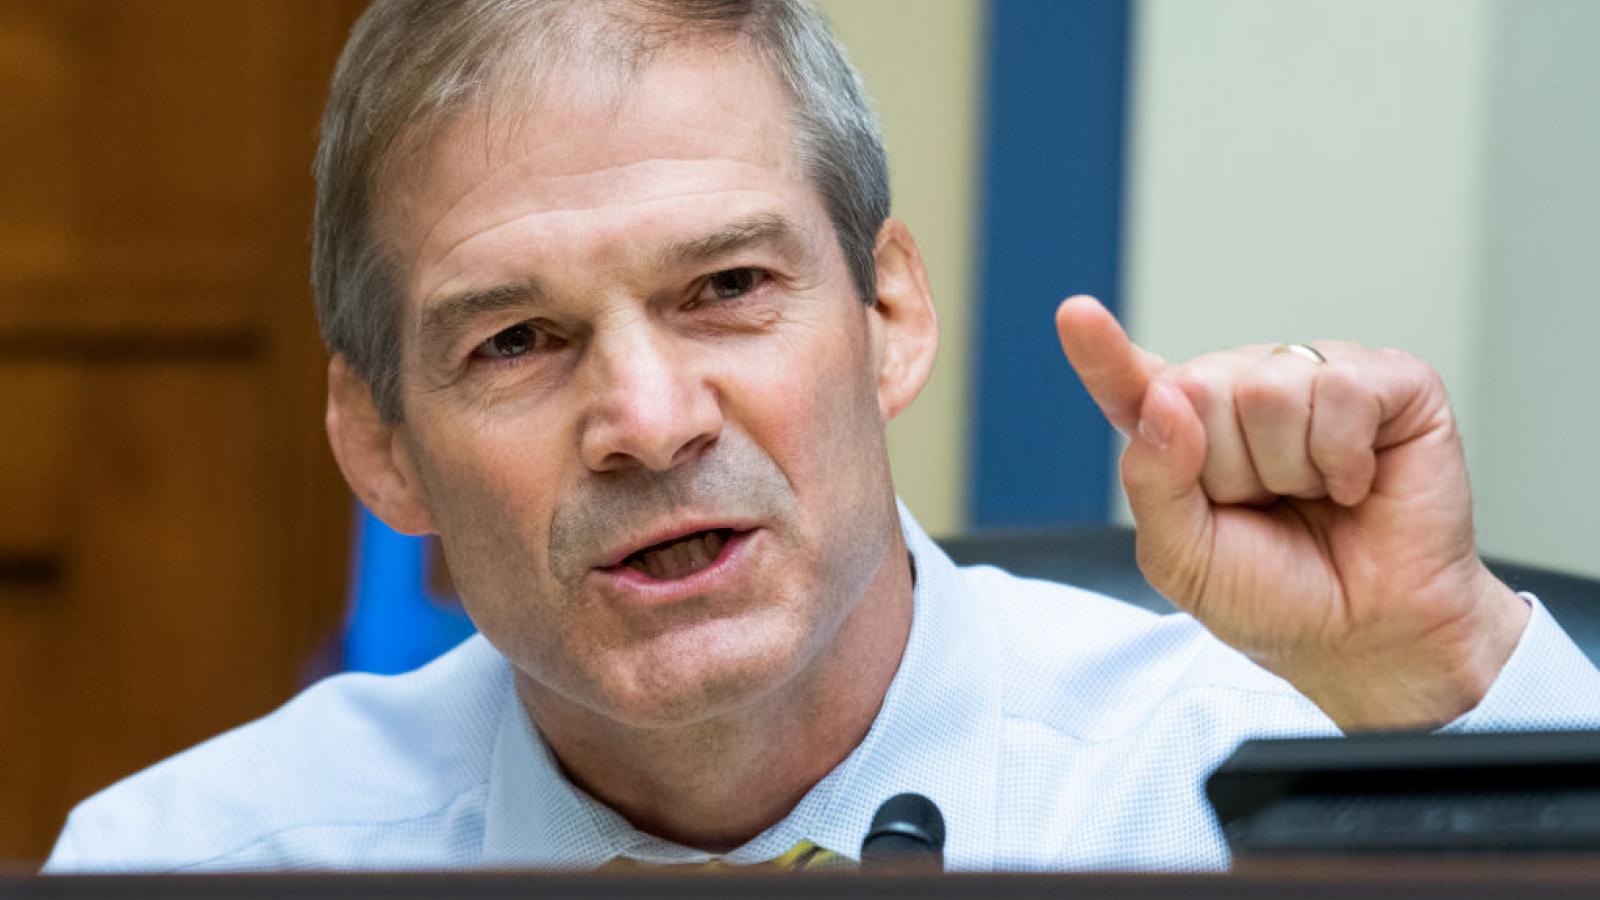 Rep. Jordan releases agenda to take on Big Tech, hold it accountable ...